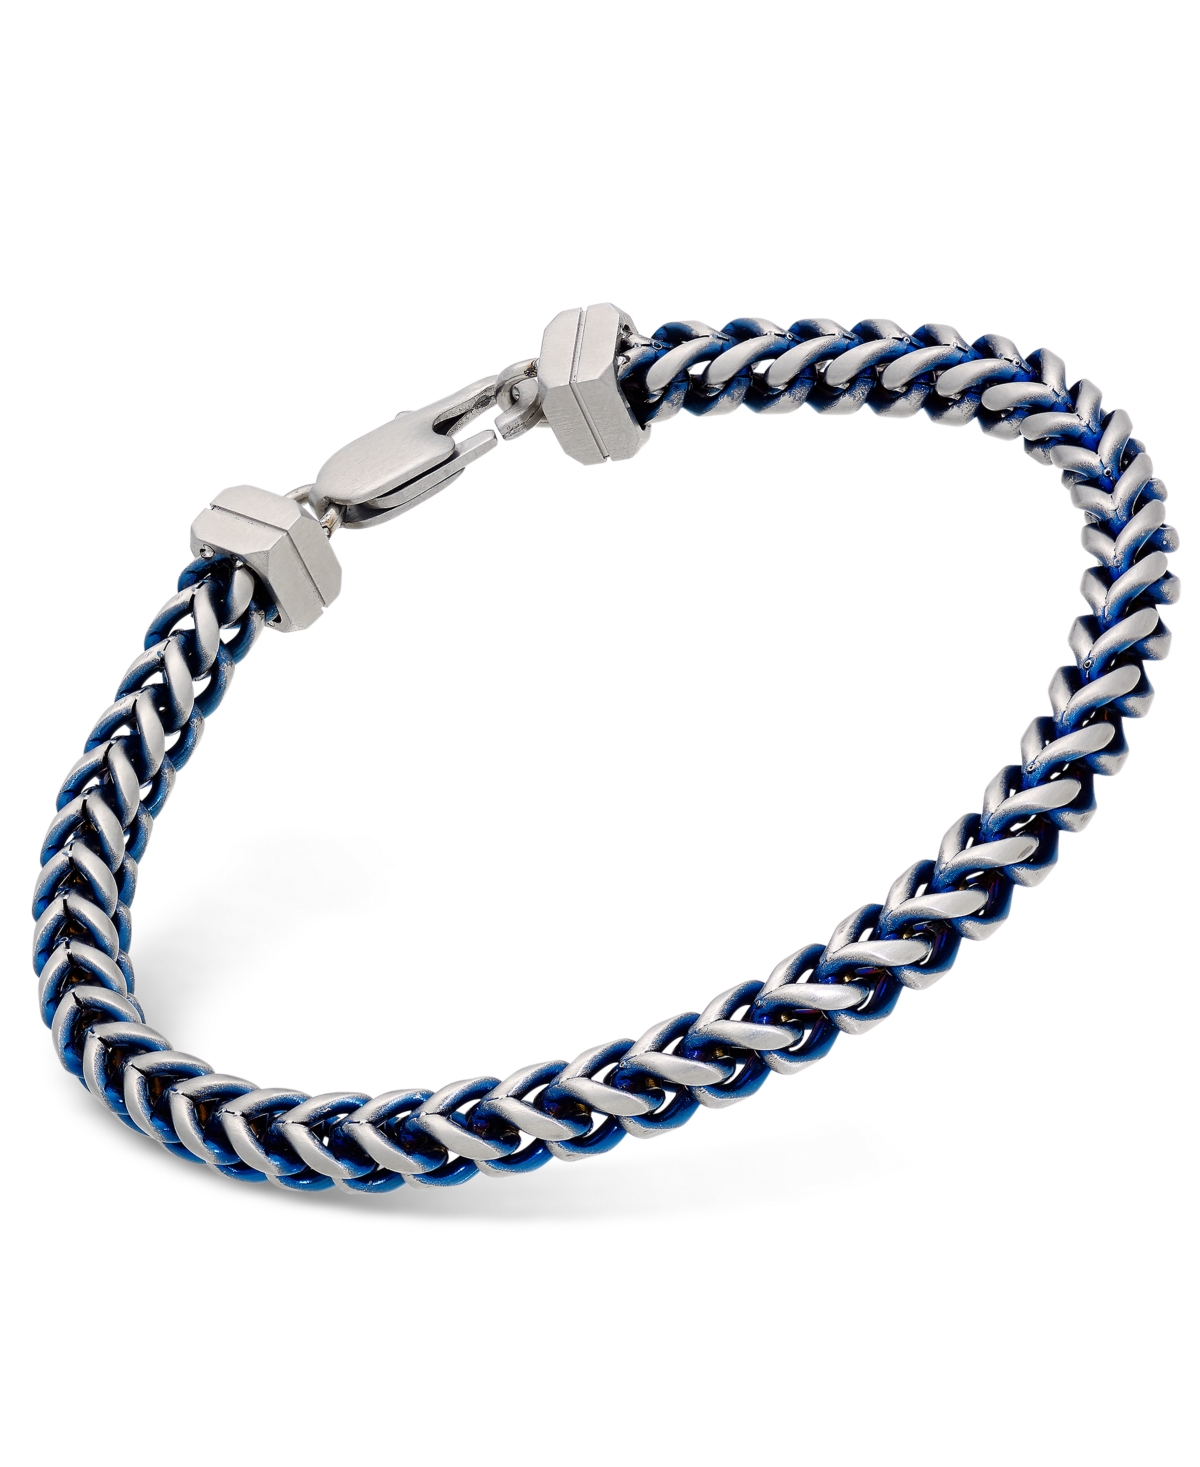 Link Chain Bracelet in Stainless Steel and Blue Ion-Plating, Created for Macy's - Silver